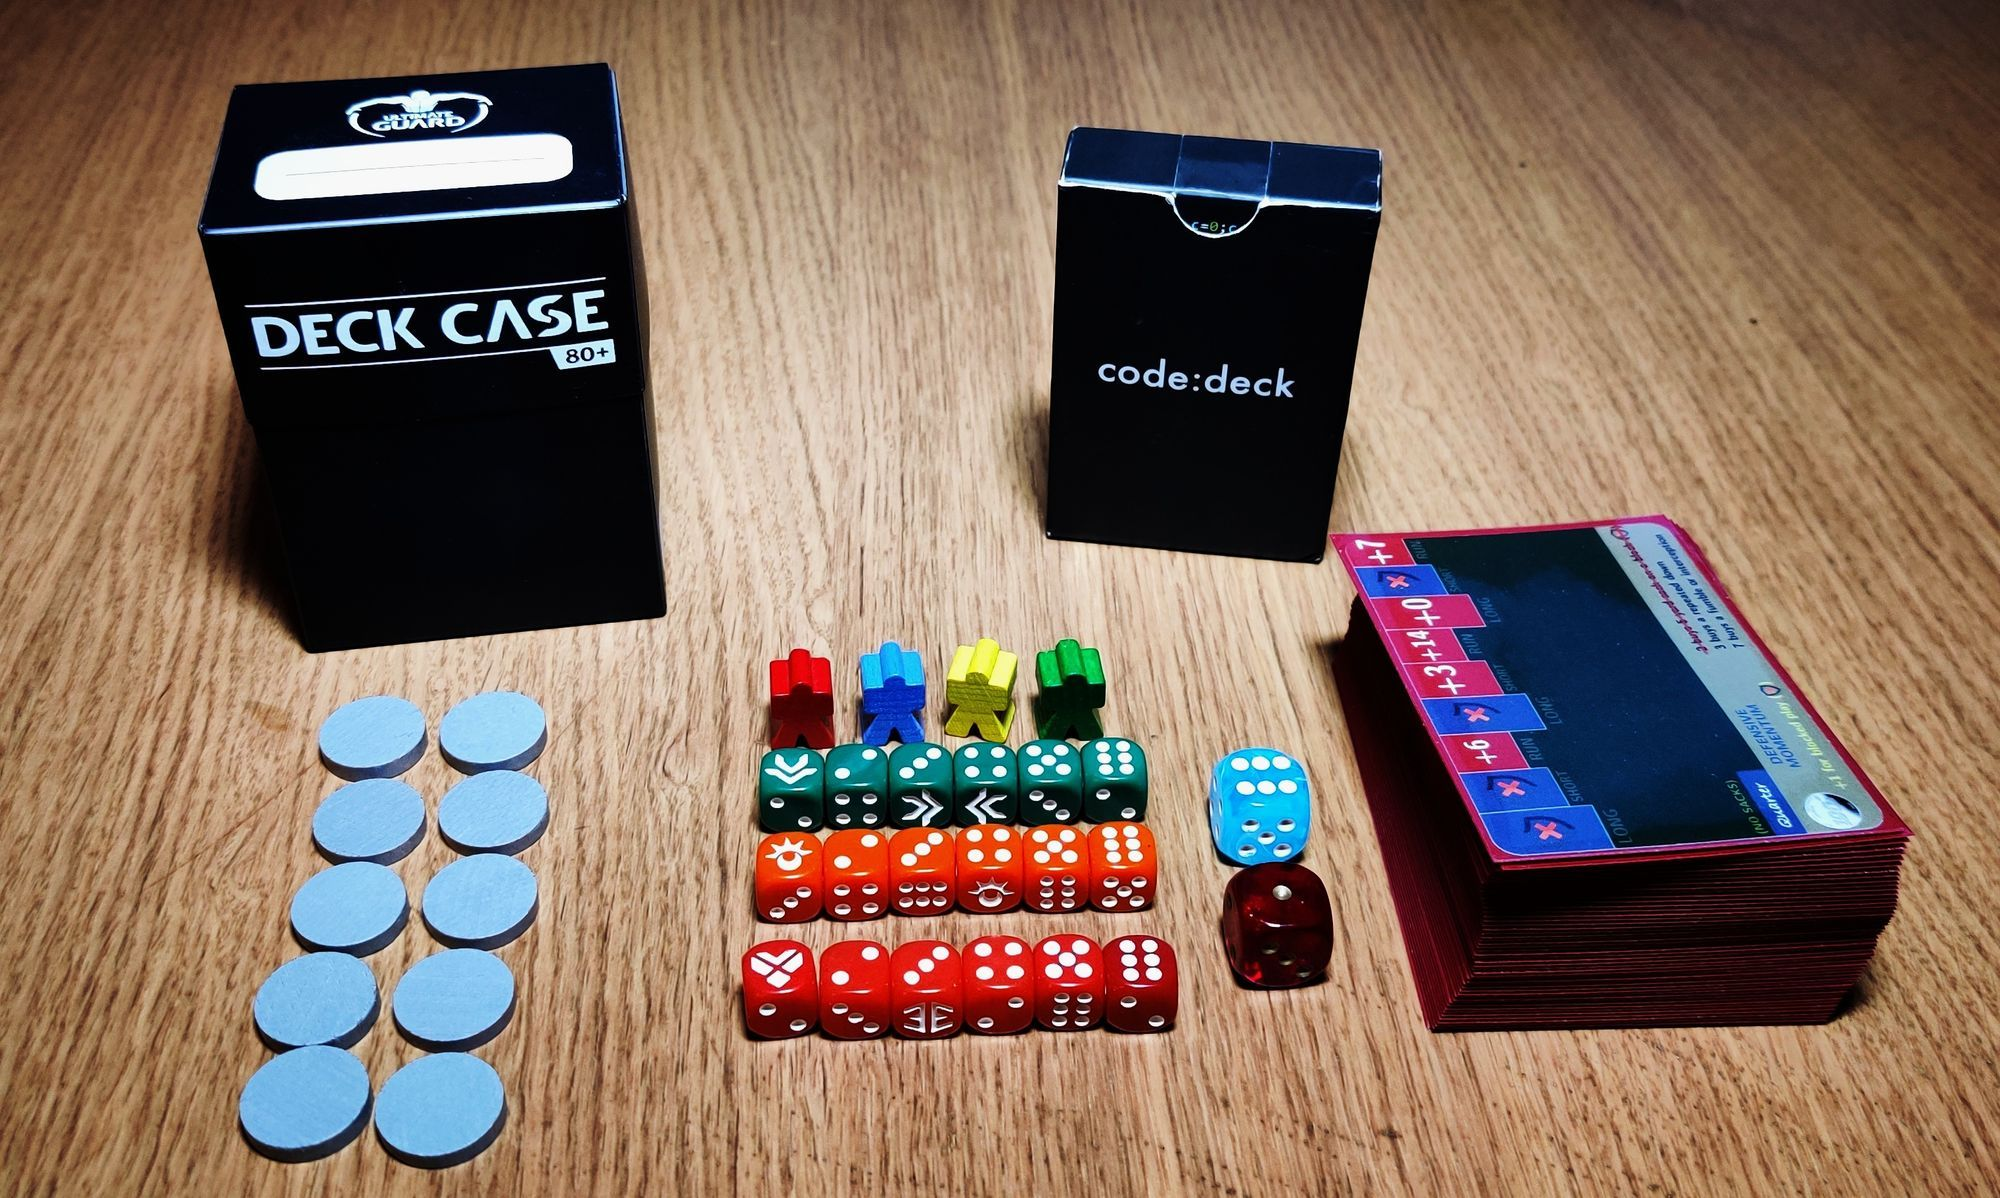 A black deckbox, few grey flat circle tokens, three sets of small dice in different colors, two larger translucent dice, a smaller deck box and a deck of cards in red sleeves. 